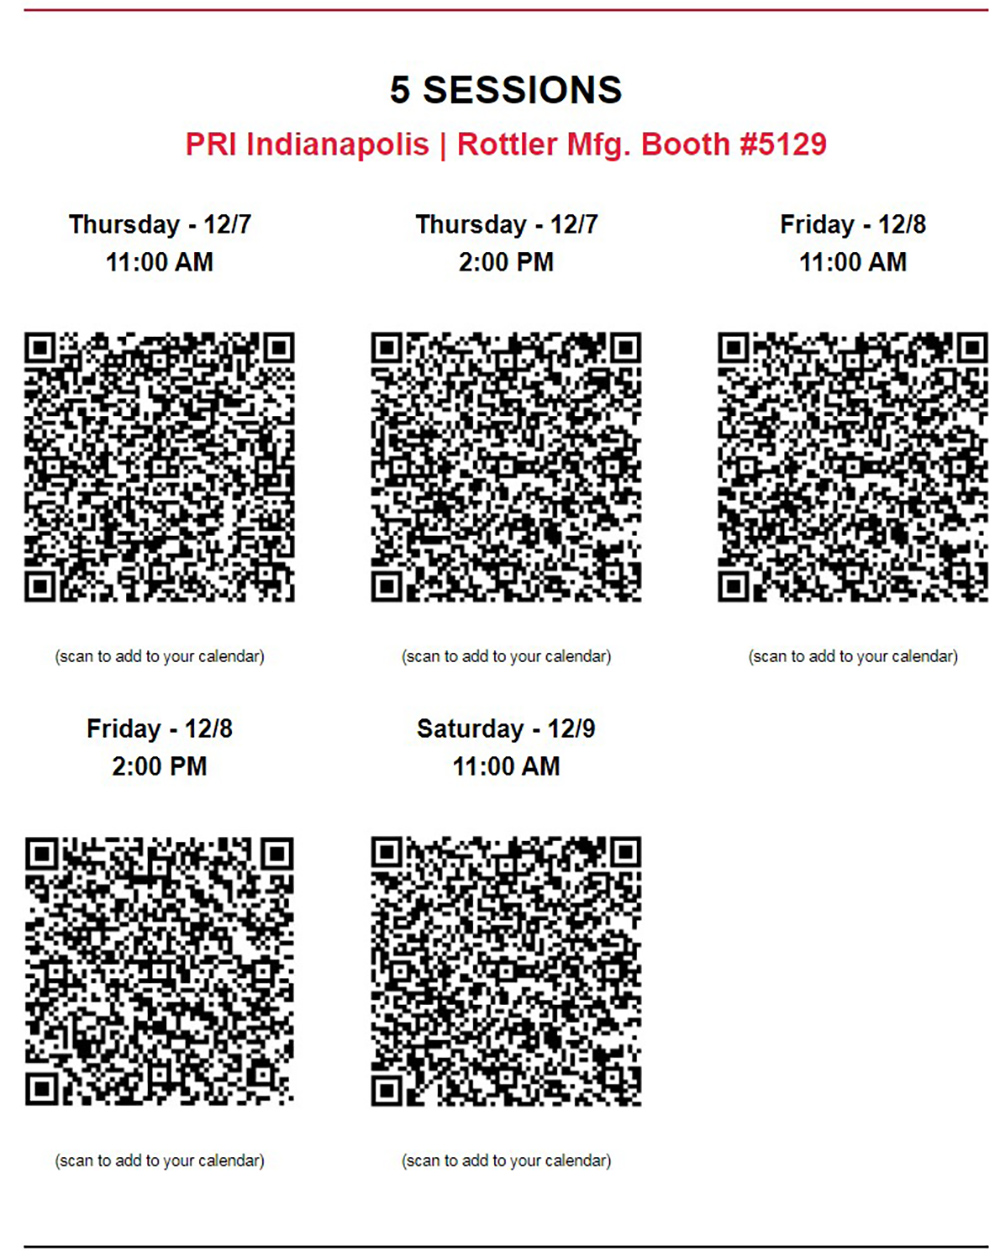 At PRI 2023 Indianapolis, the panel of Mark Malburg (Digital Metrology), Ed Kiebler (Rottler Manufacturing) and Keith Jones (Total Seal Piston Rings) will dive into the topic of surface finishes for racing applications. These panel discussions will take place at the Rottler Manufacturing booth #5129. Dates and times for the panel discussions are shown below.